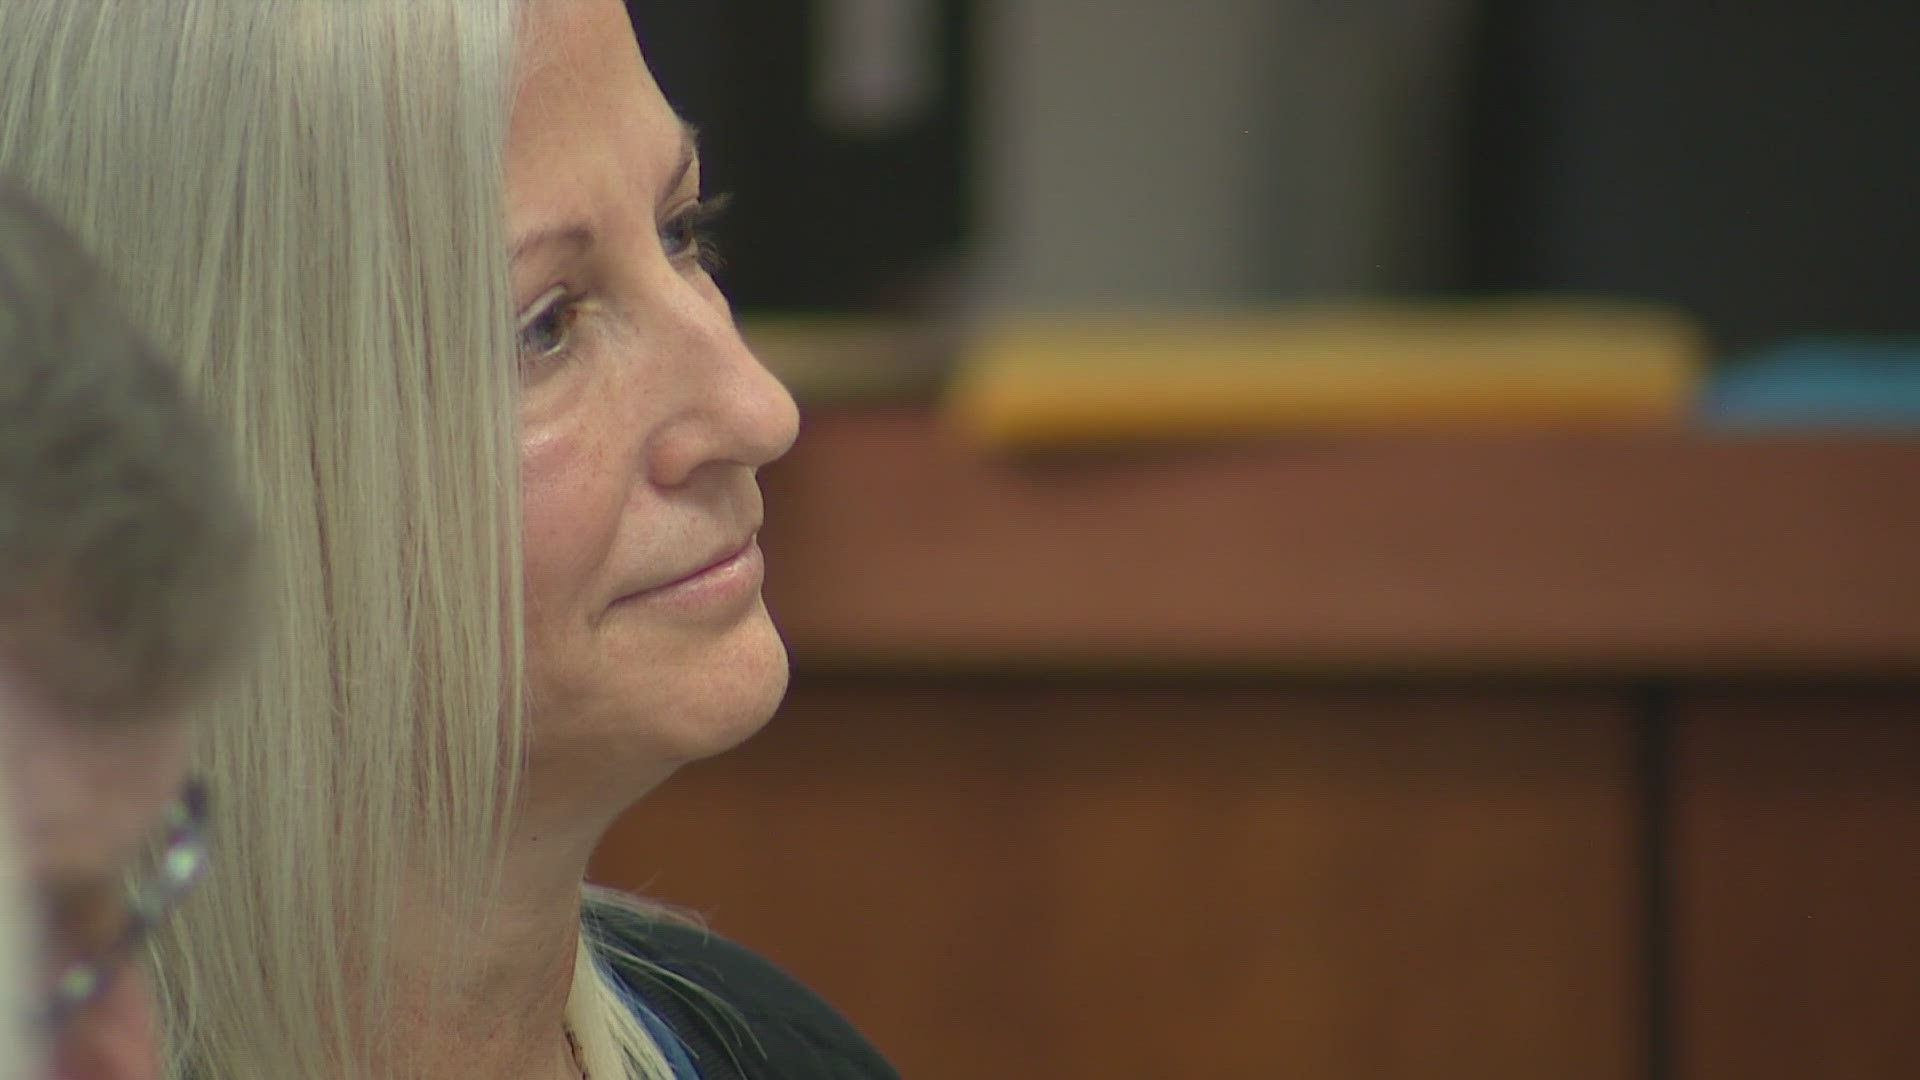 Although Dr. Laurynn Evans may avoid a conviction, some students and parents at North Kitsap said they hope she won't return as superintendent.